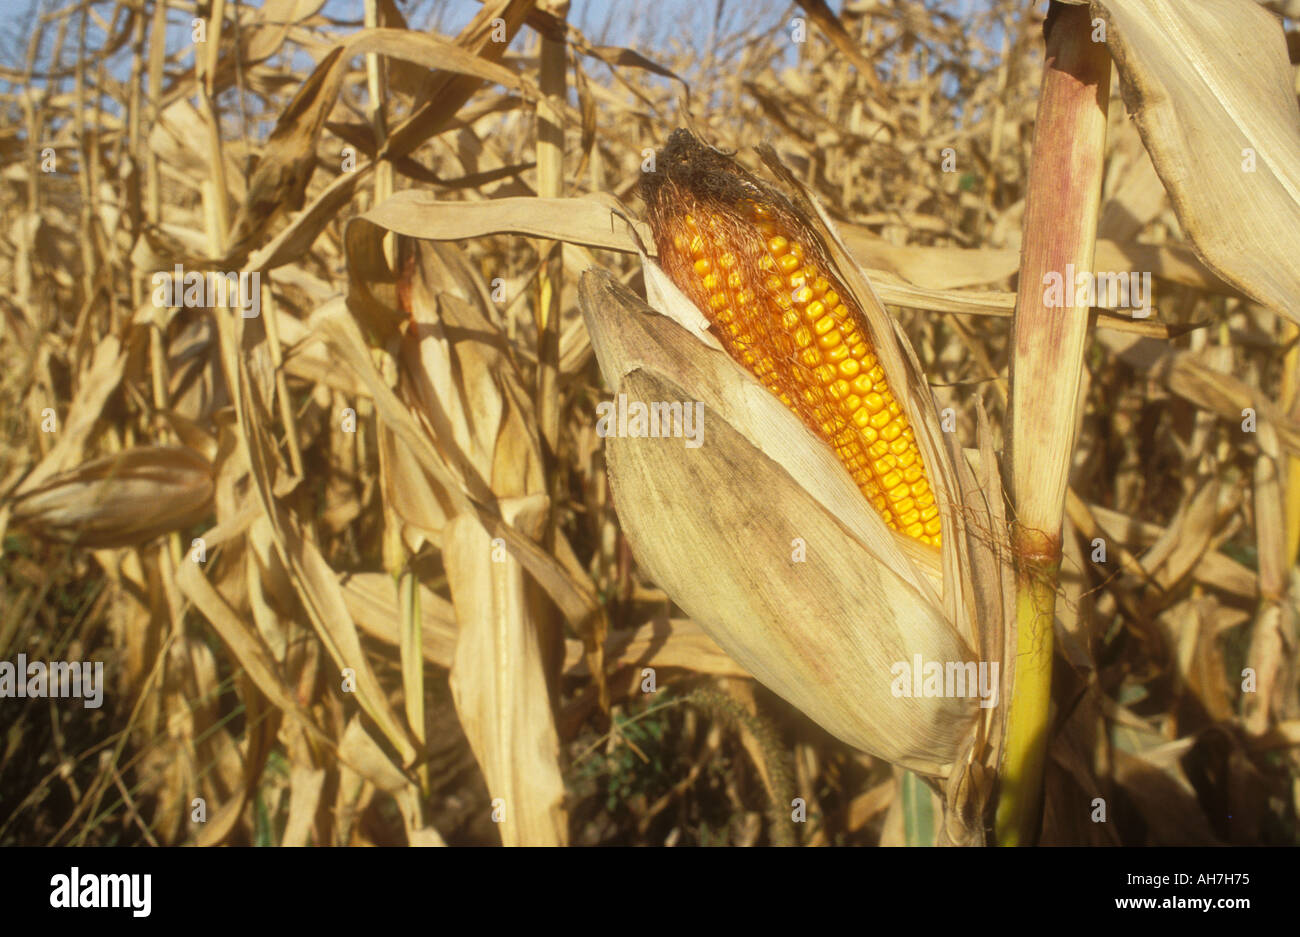 Ripe Corn on the Cob or Maize revealed in field Stock Photo